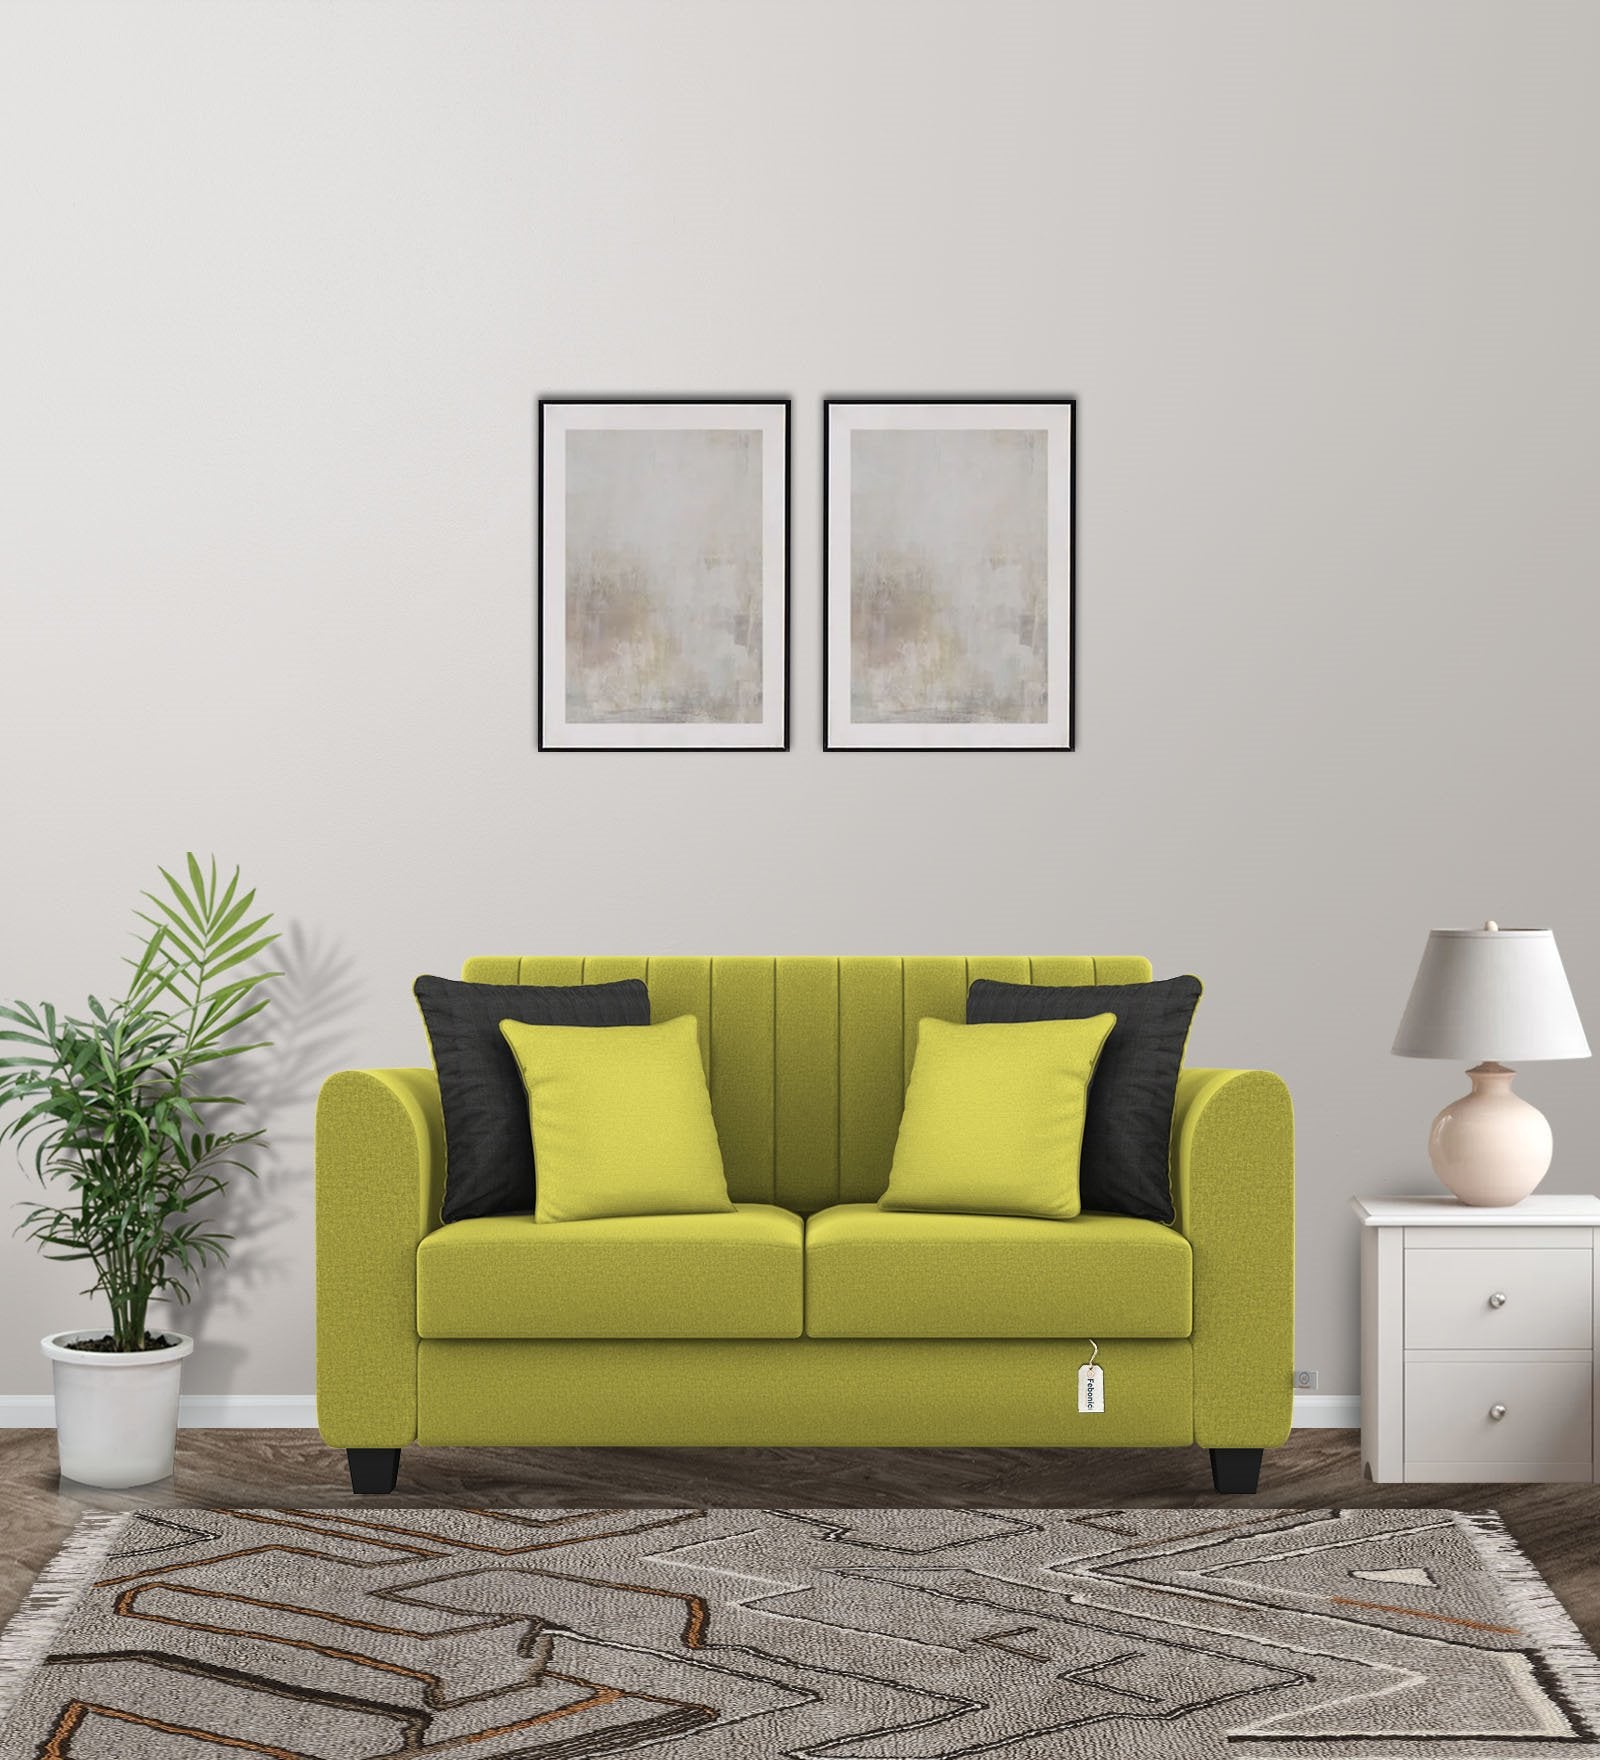 Cosmic Fabric 2 Seater Sofa in Parrot Green Colour